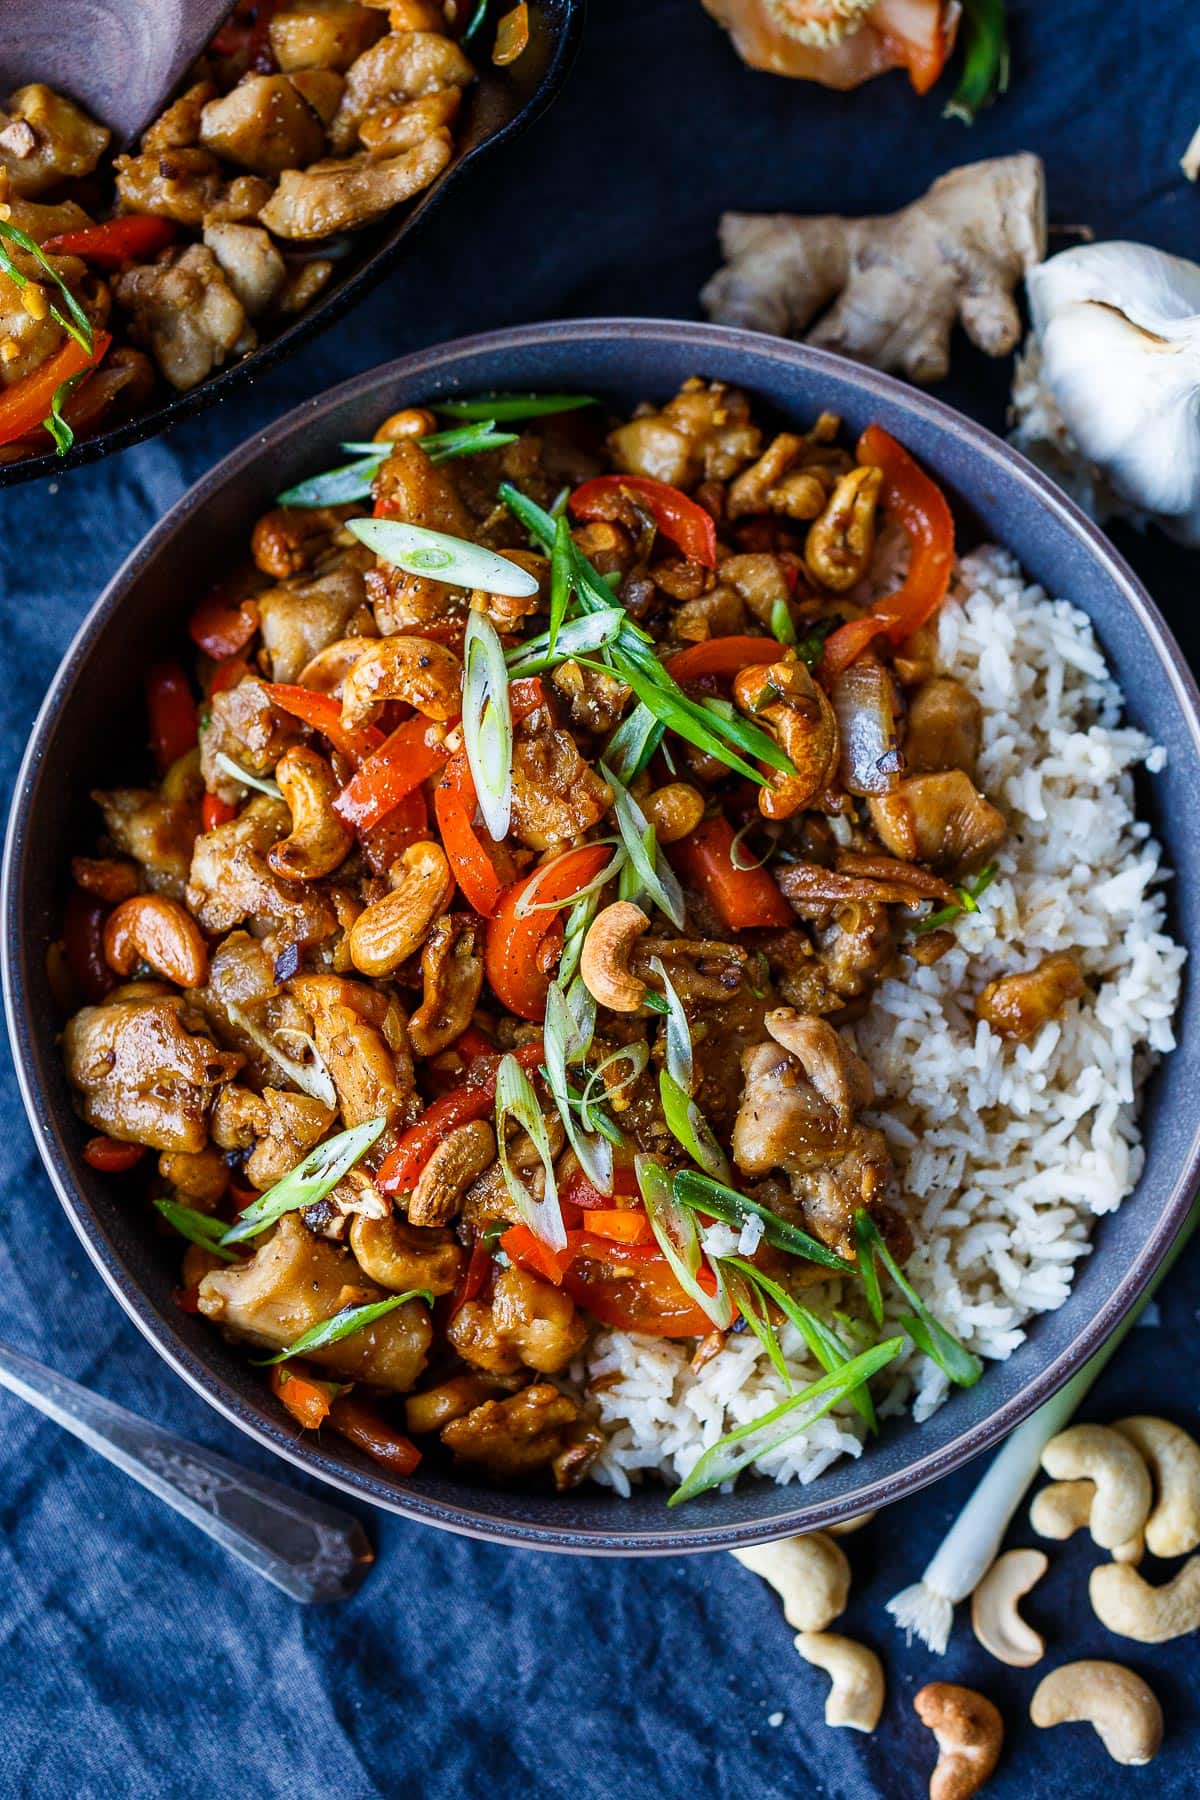 A healthy take on Cashew Chicken, tender garlicky chicken stir-fried with red bell peppers and roasted cashews tossed with a flavorful savory homemade stirfry sauce.